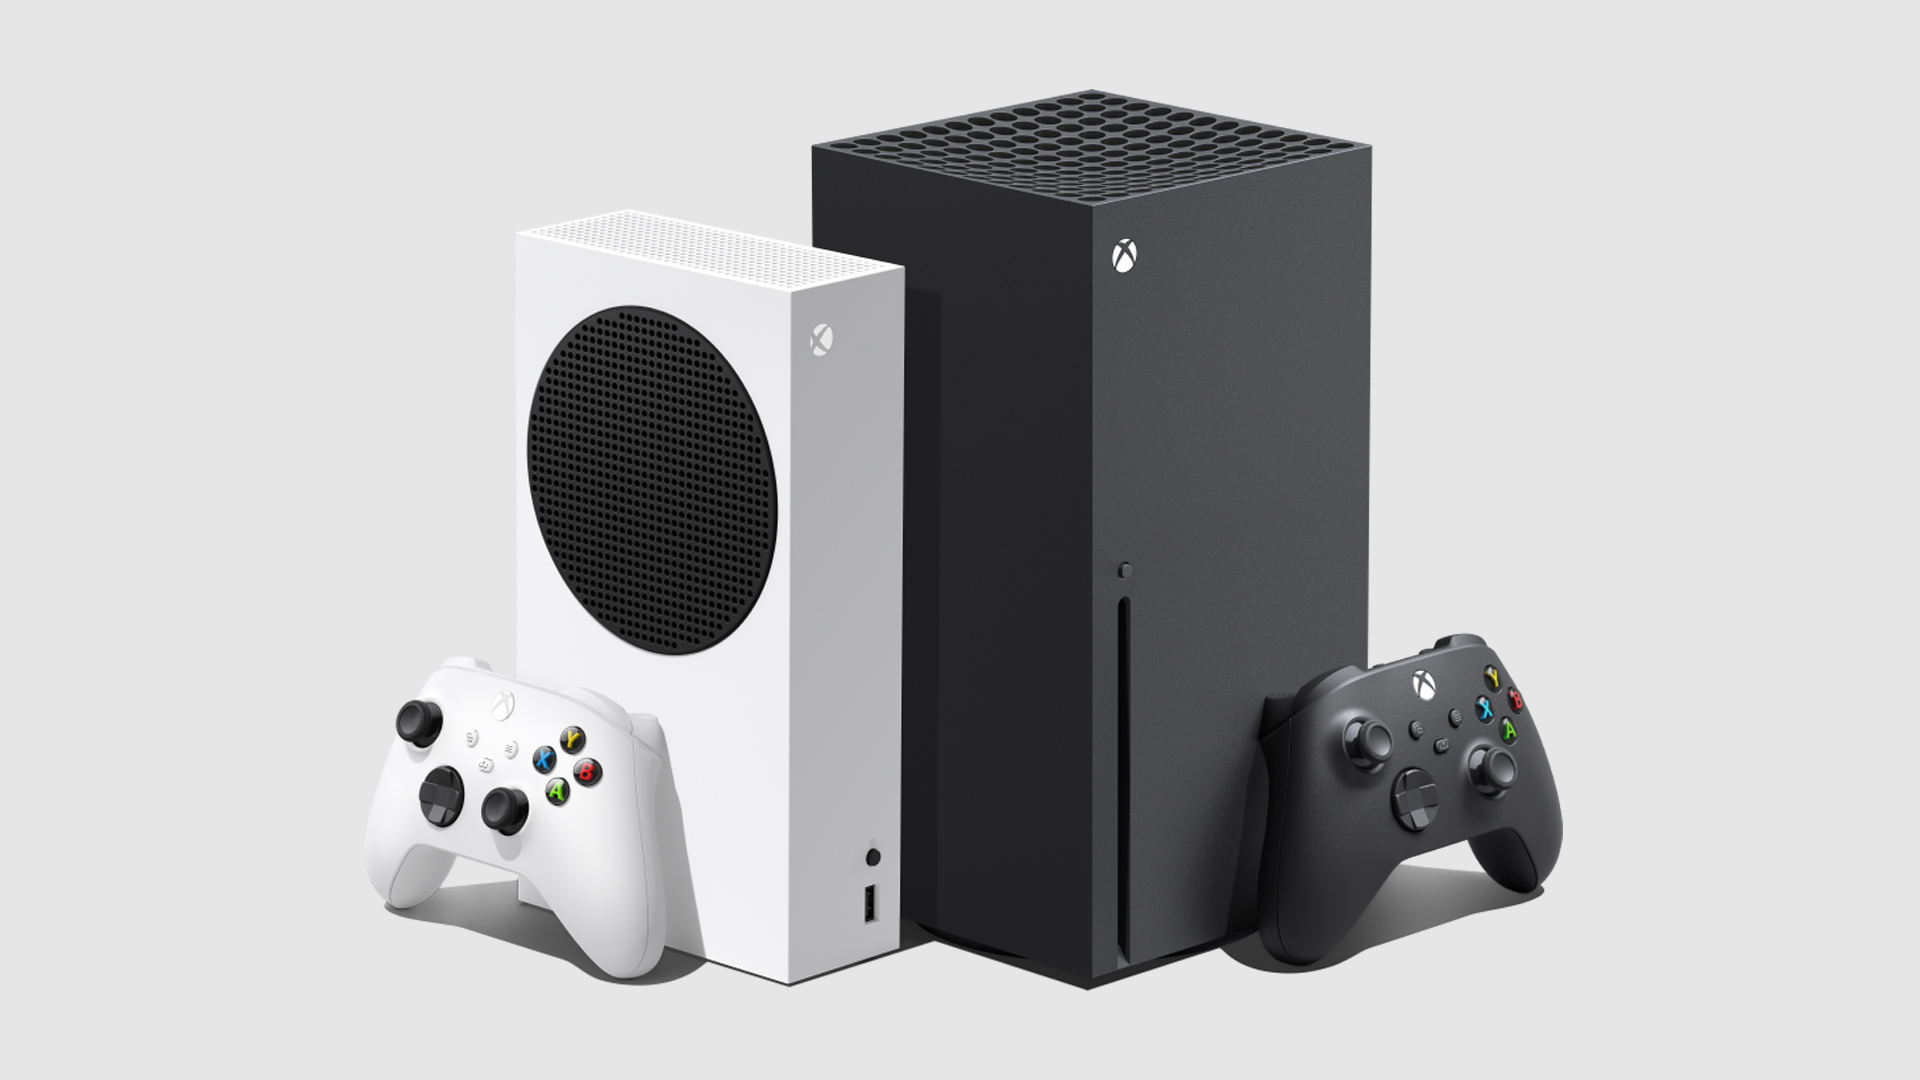 Third-party developers question the feasibility of porting their games to Xbox Series consoles